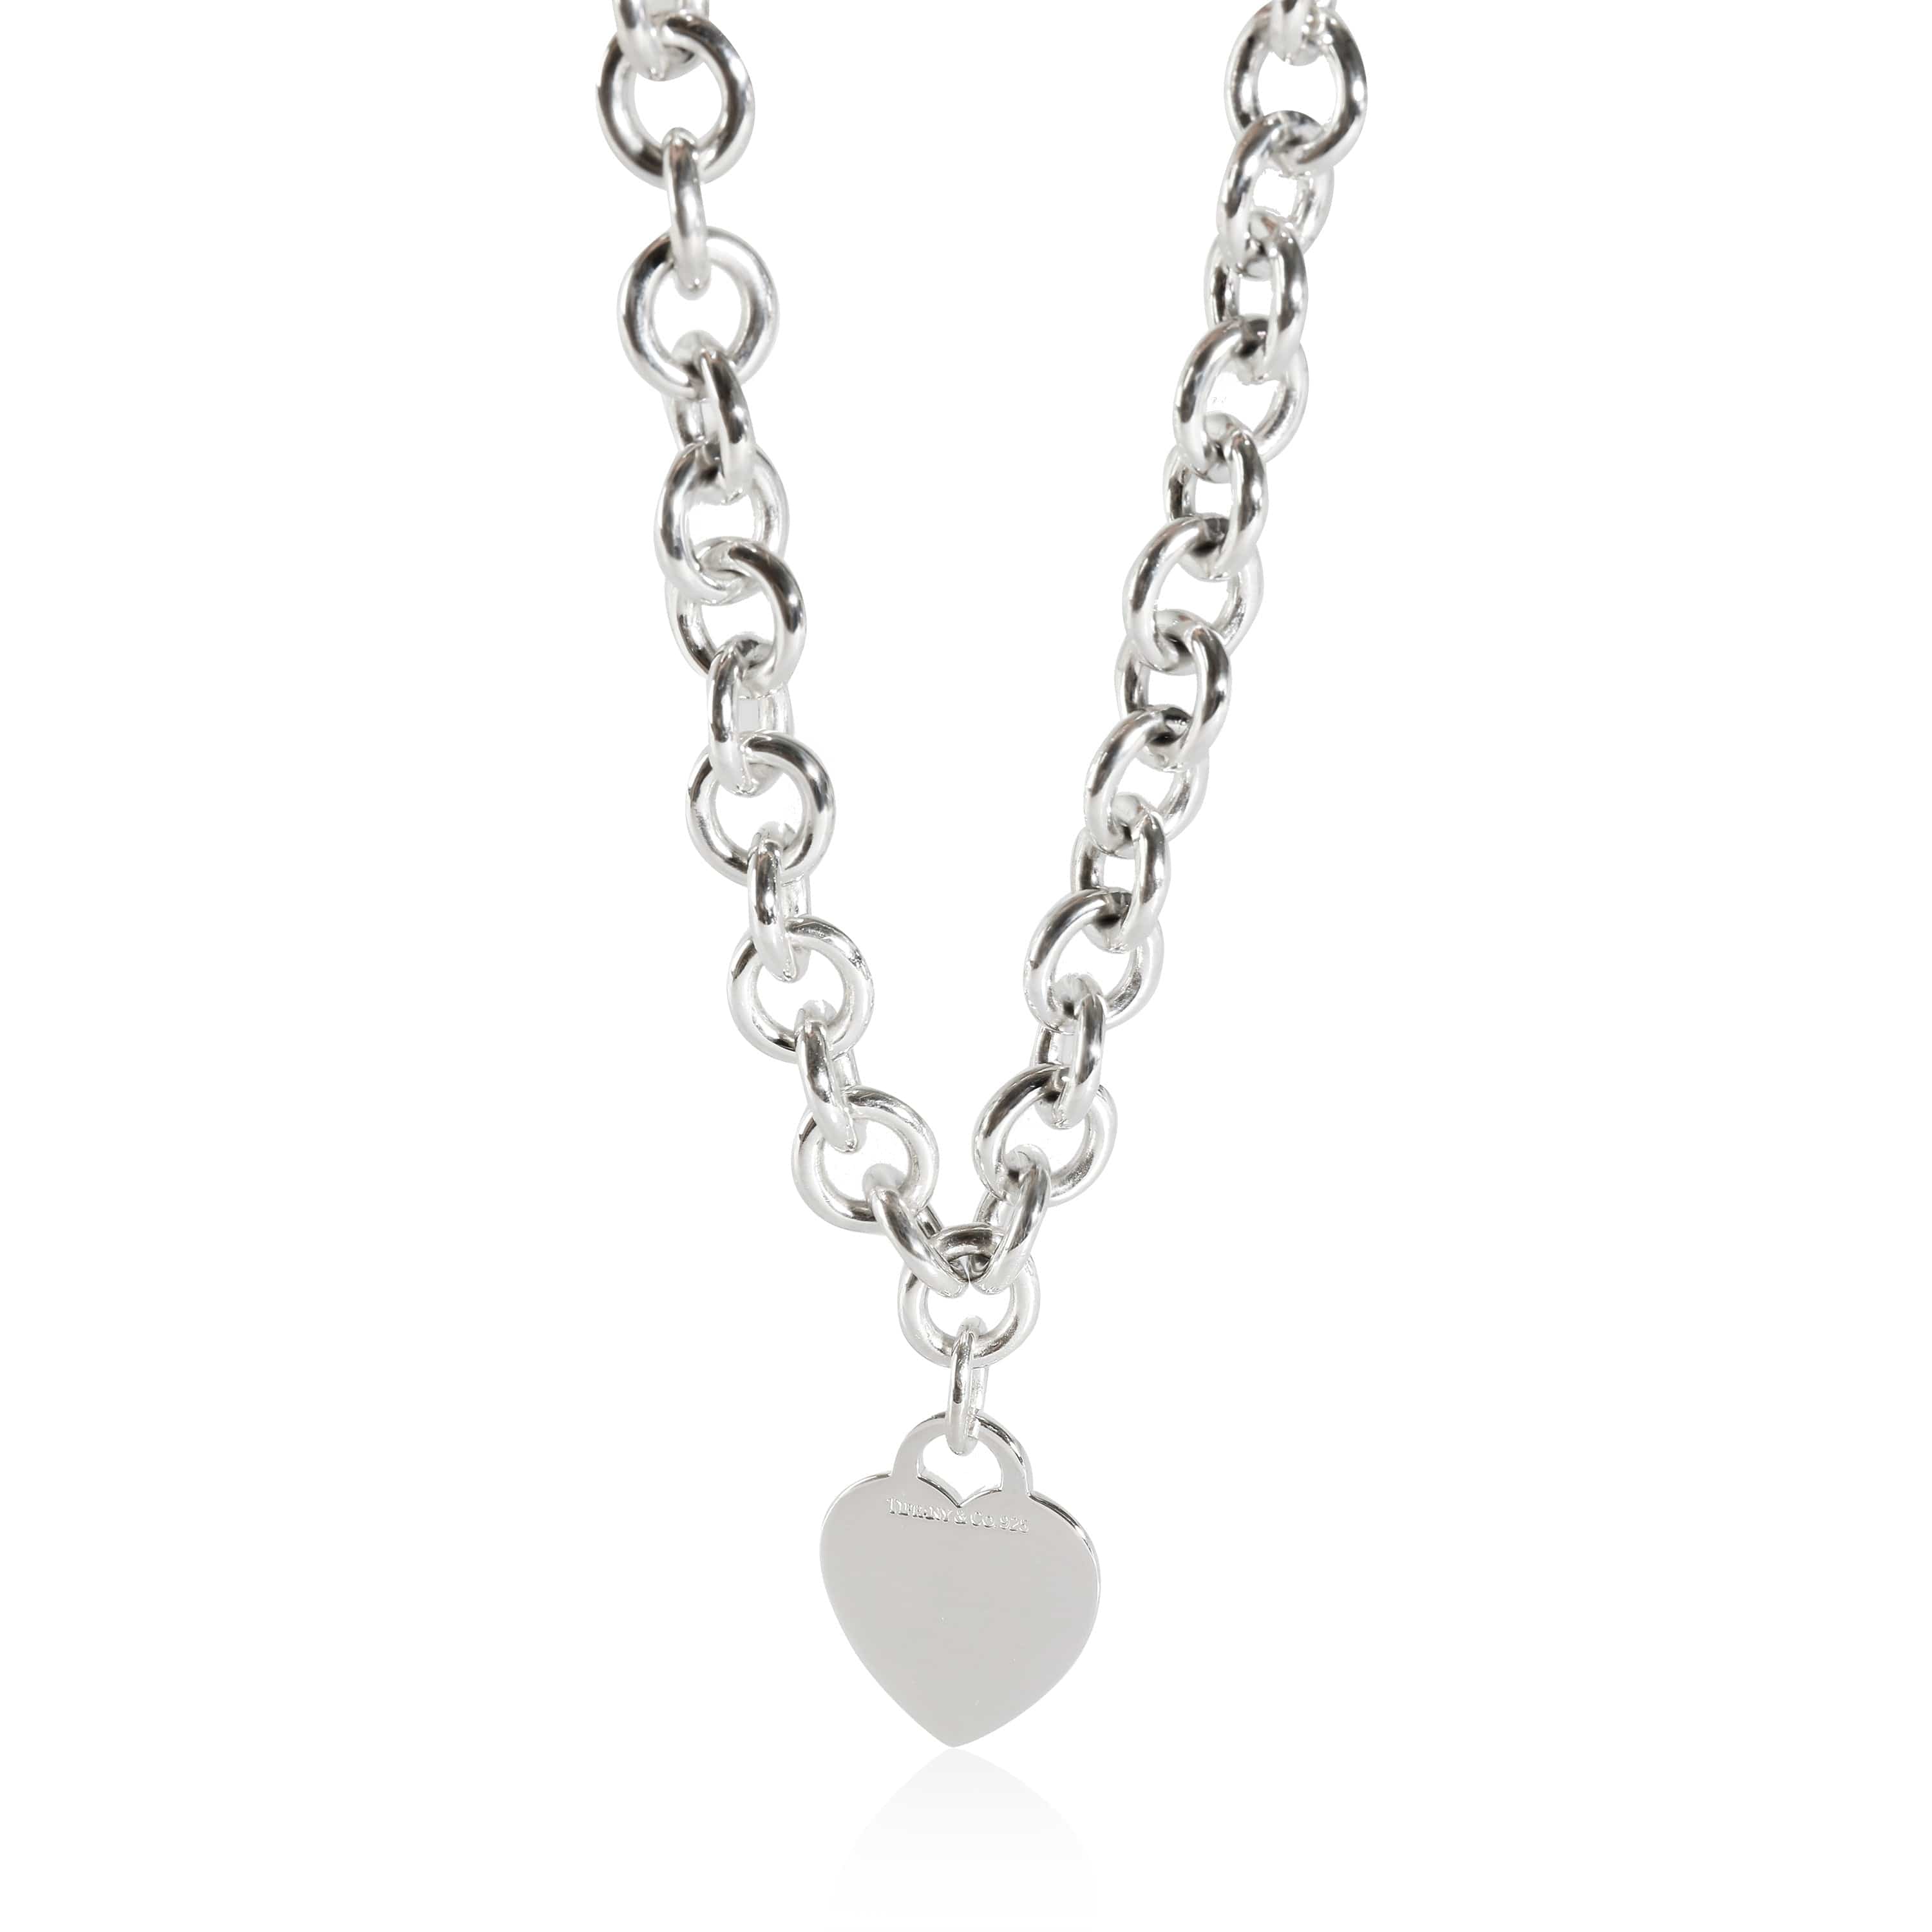 Tiffany & Co. Heart Tag Necklace in Sterling Silver